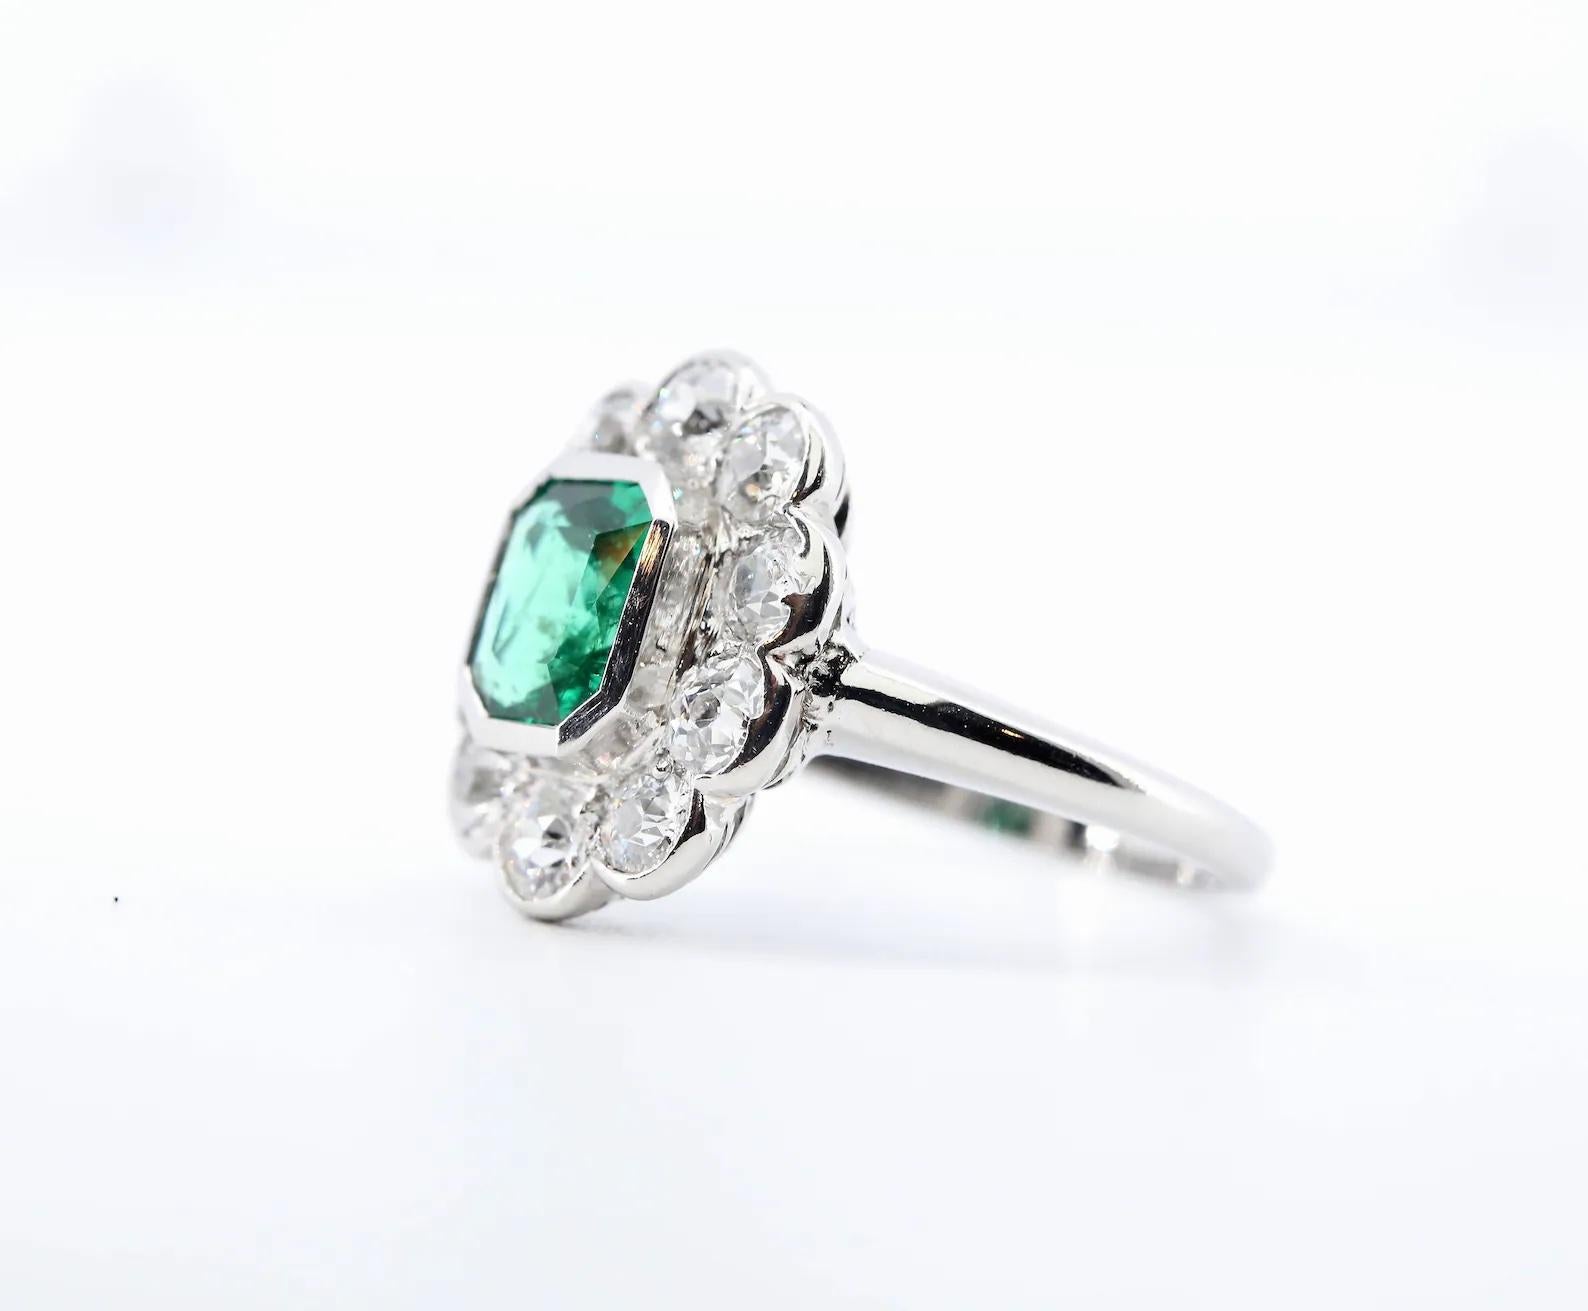 An Art Deco period emerald, and diamond ring set in platinum.

Centered by a bezel set rich vivid forest green 1.10 carat emerald. The emerald is of very fine clarity, having only the most minor oil treatment per the accompanying GIA